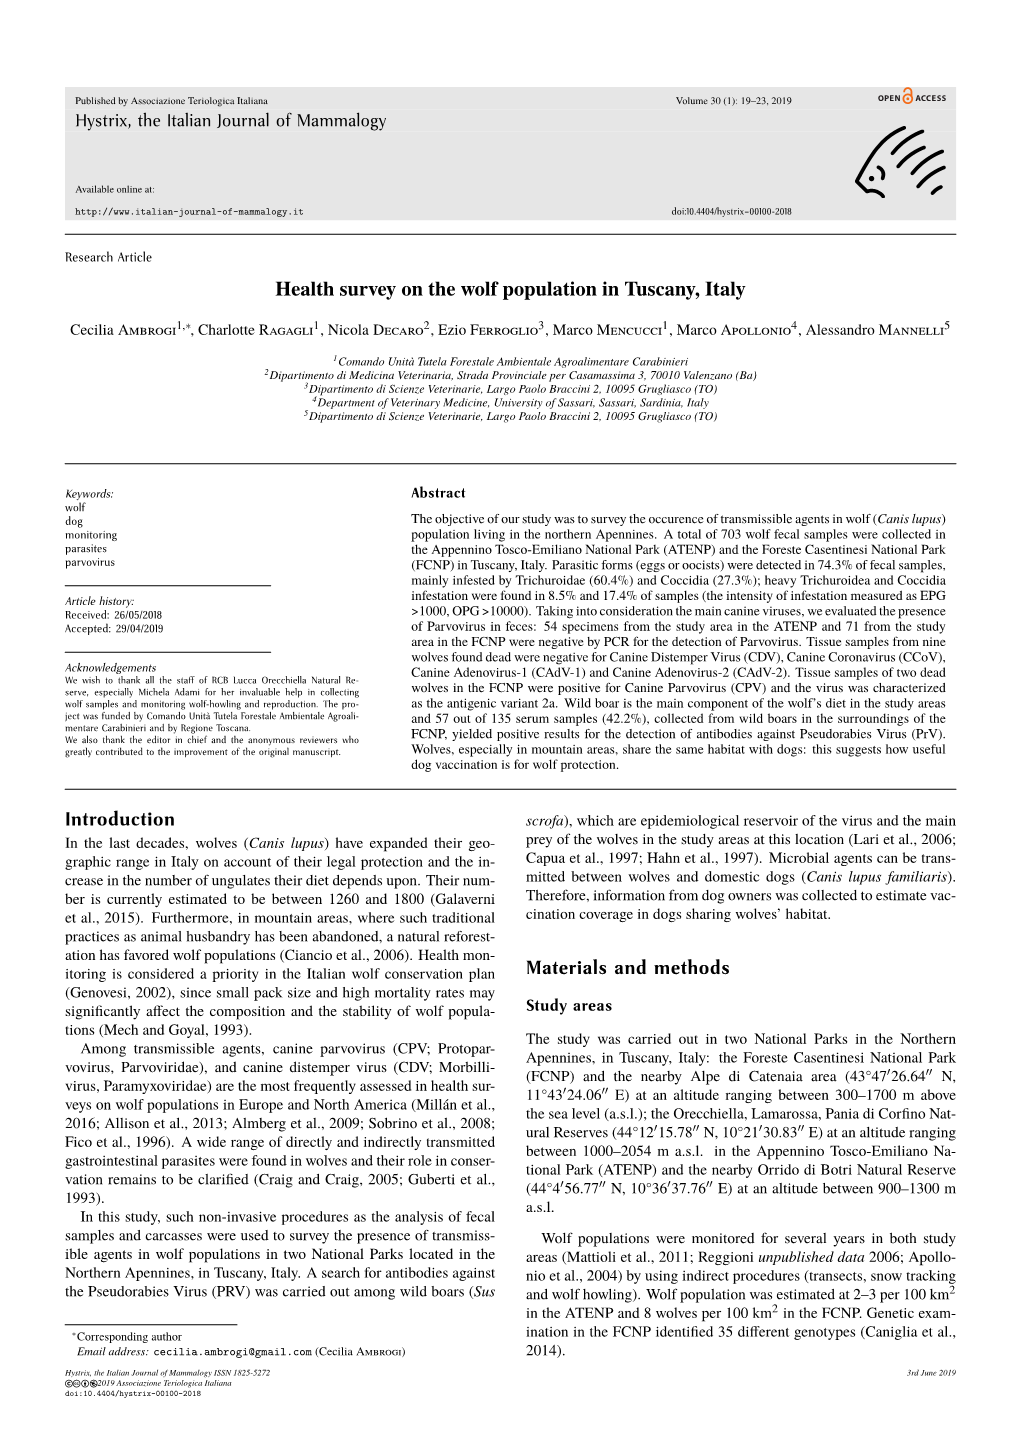 Health Survey on the Wolf Population in Tuscany, Italy